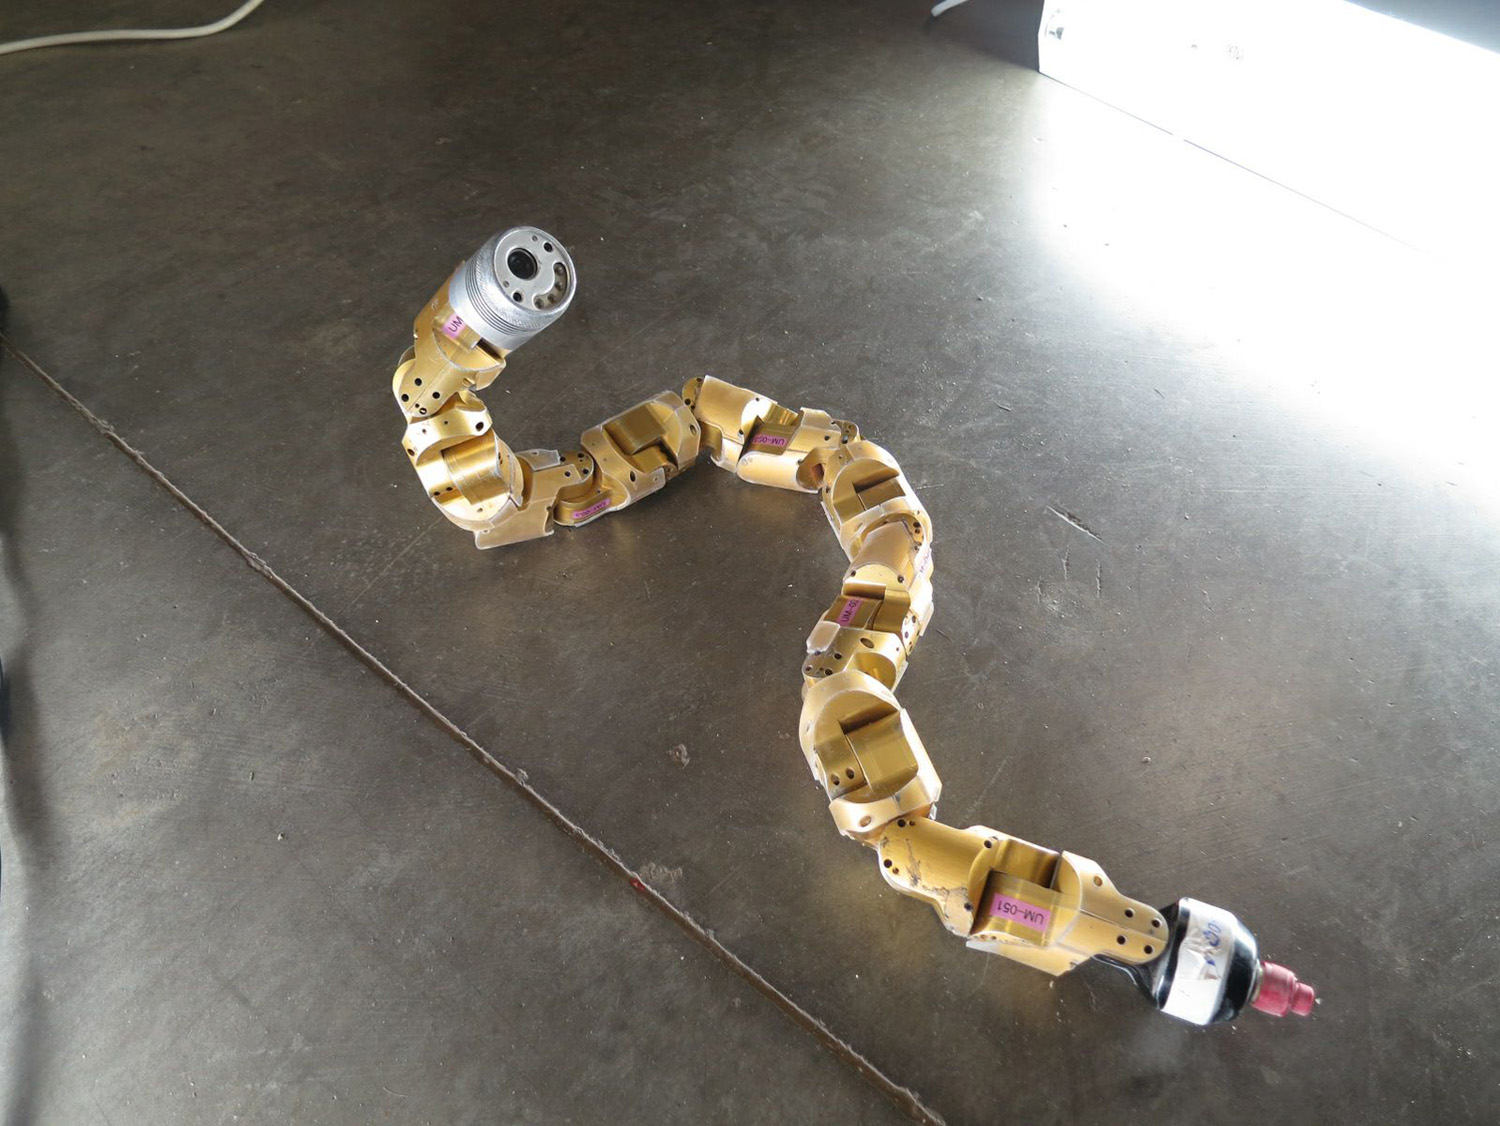 Researchers used what they learned from observations of sidewinder snakes to improve the operation of this snake robot, which was developed at Carnegie Mellon University. (Courtesy Carnegie Mellon University)